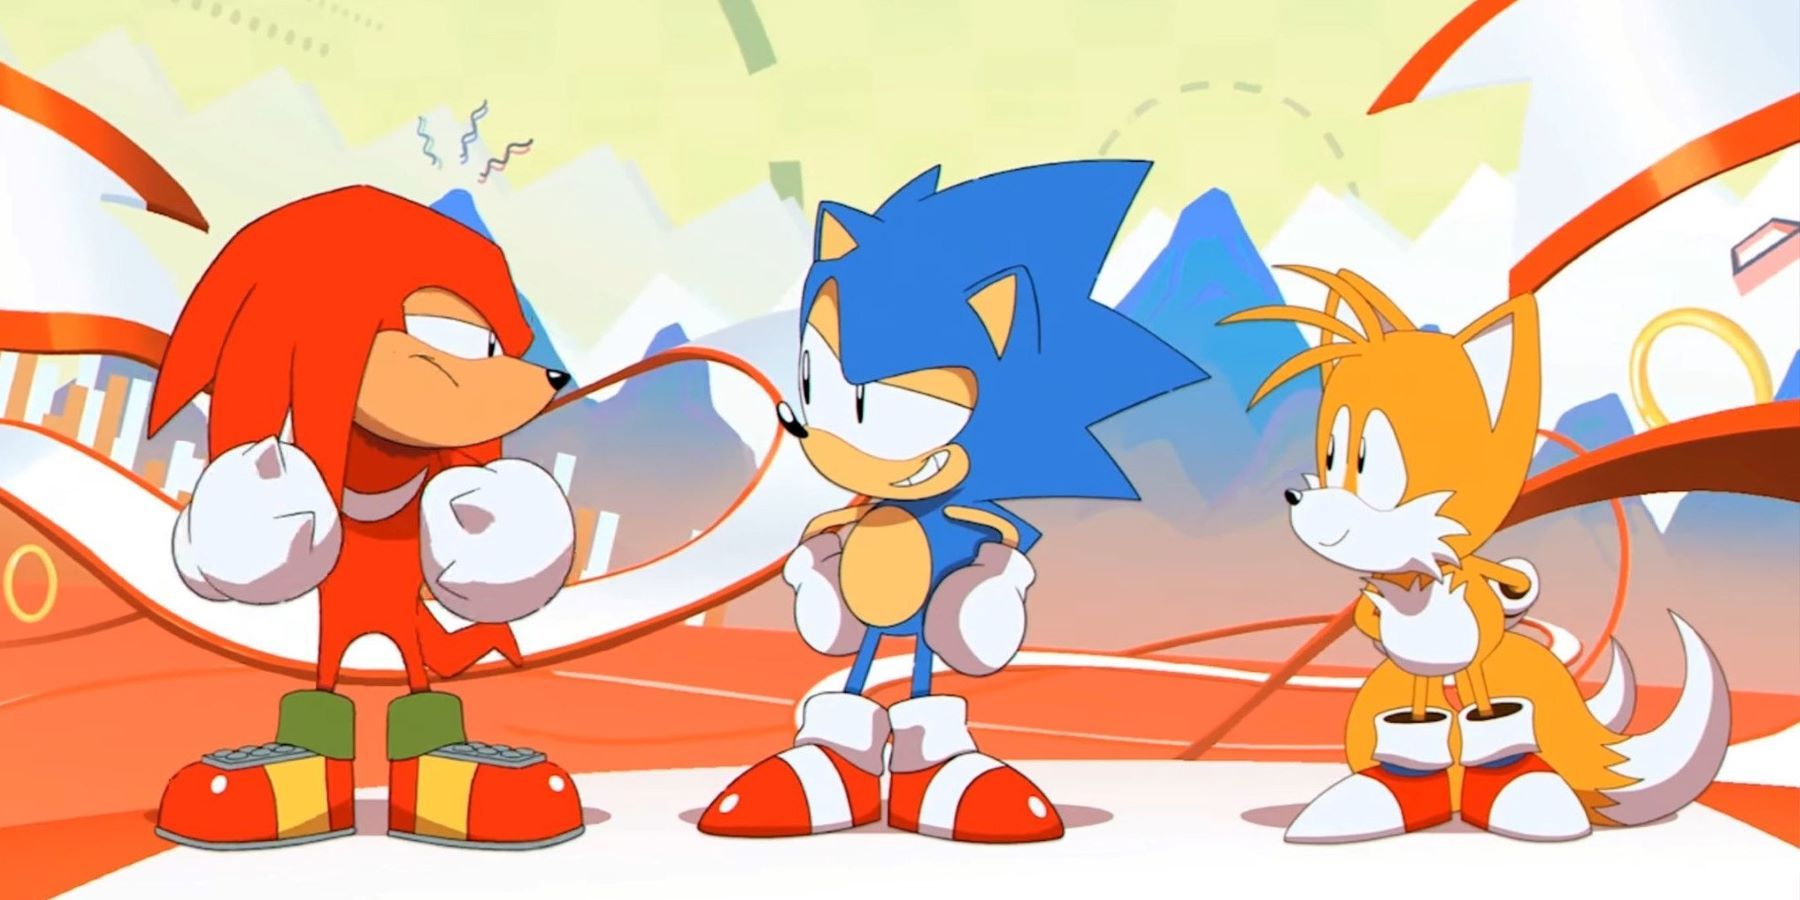 Knuckles, Sonic, and Tails in a Sonic Mania trailer